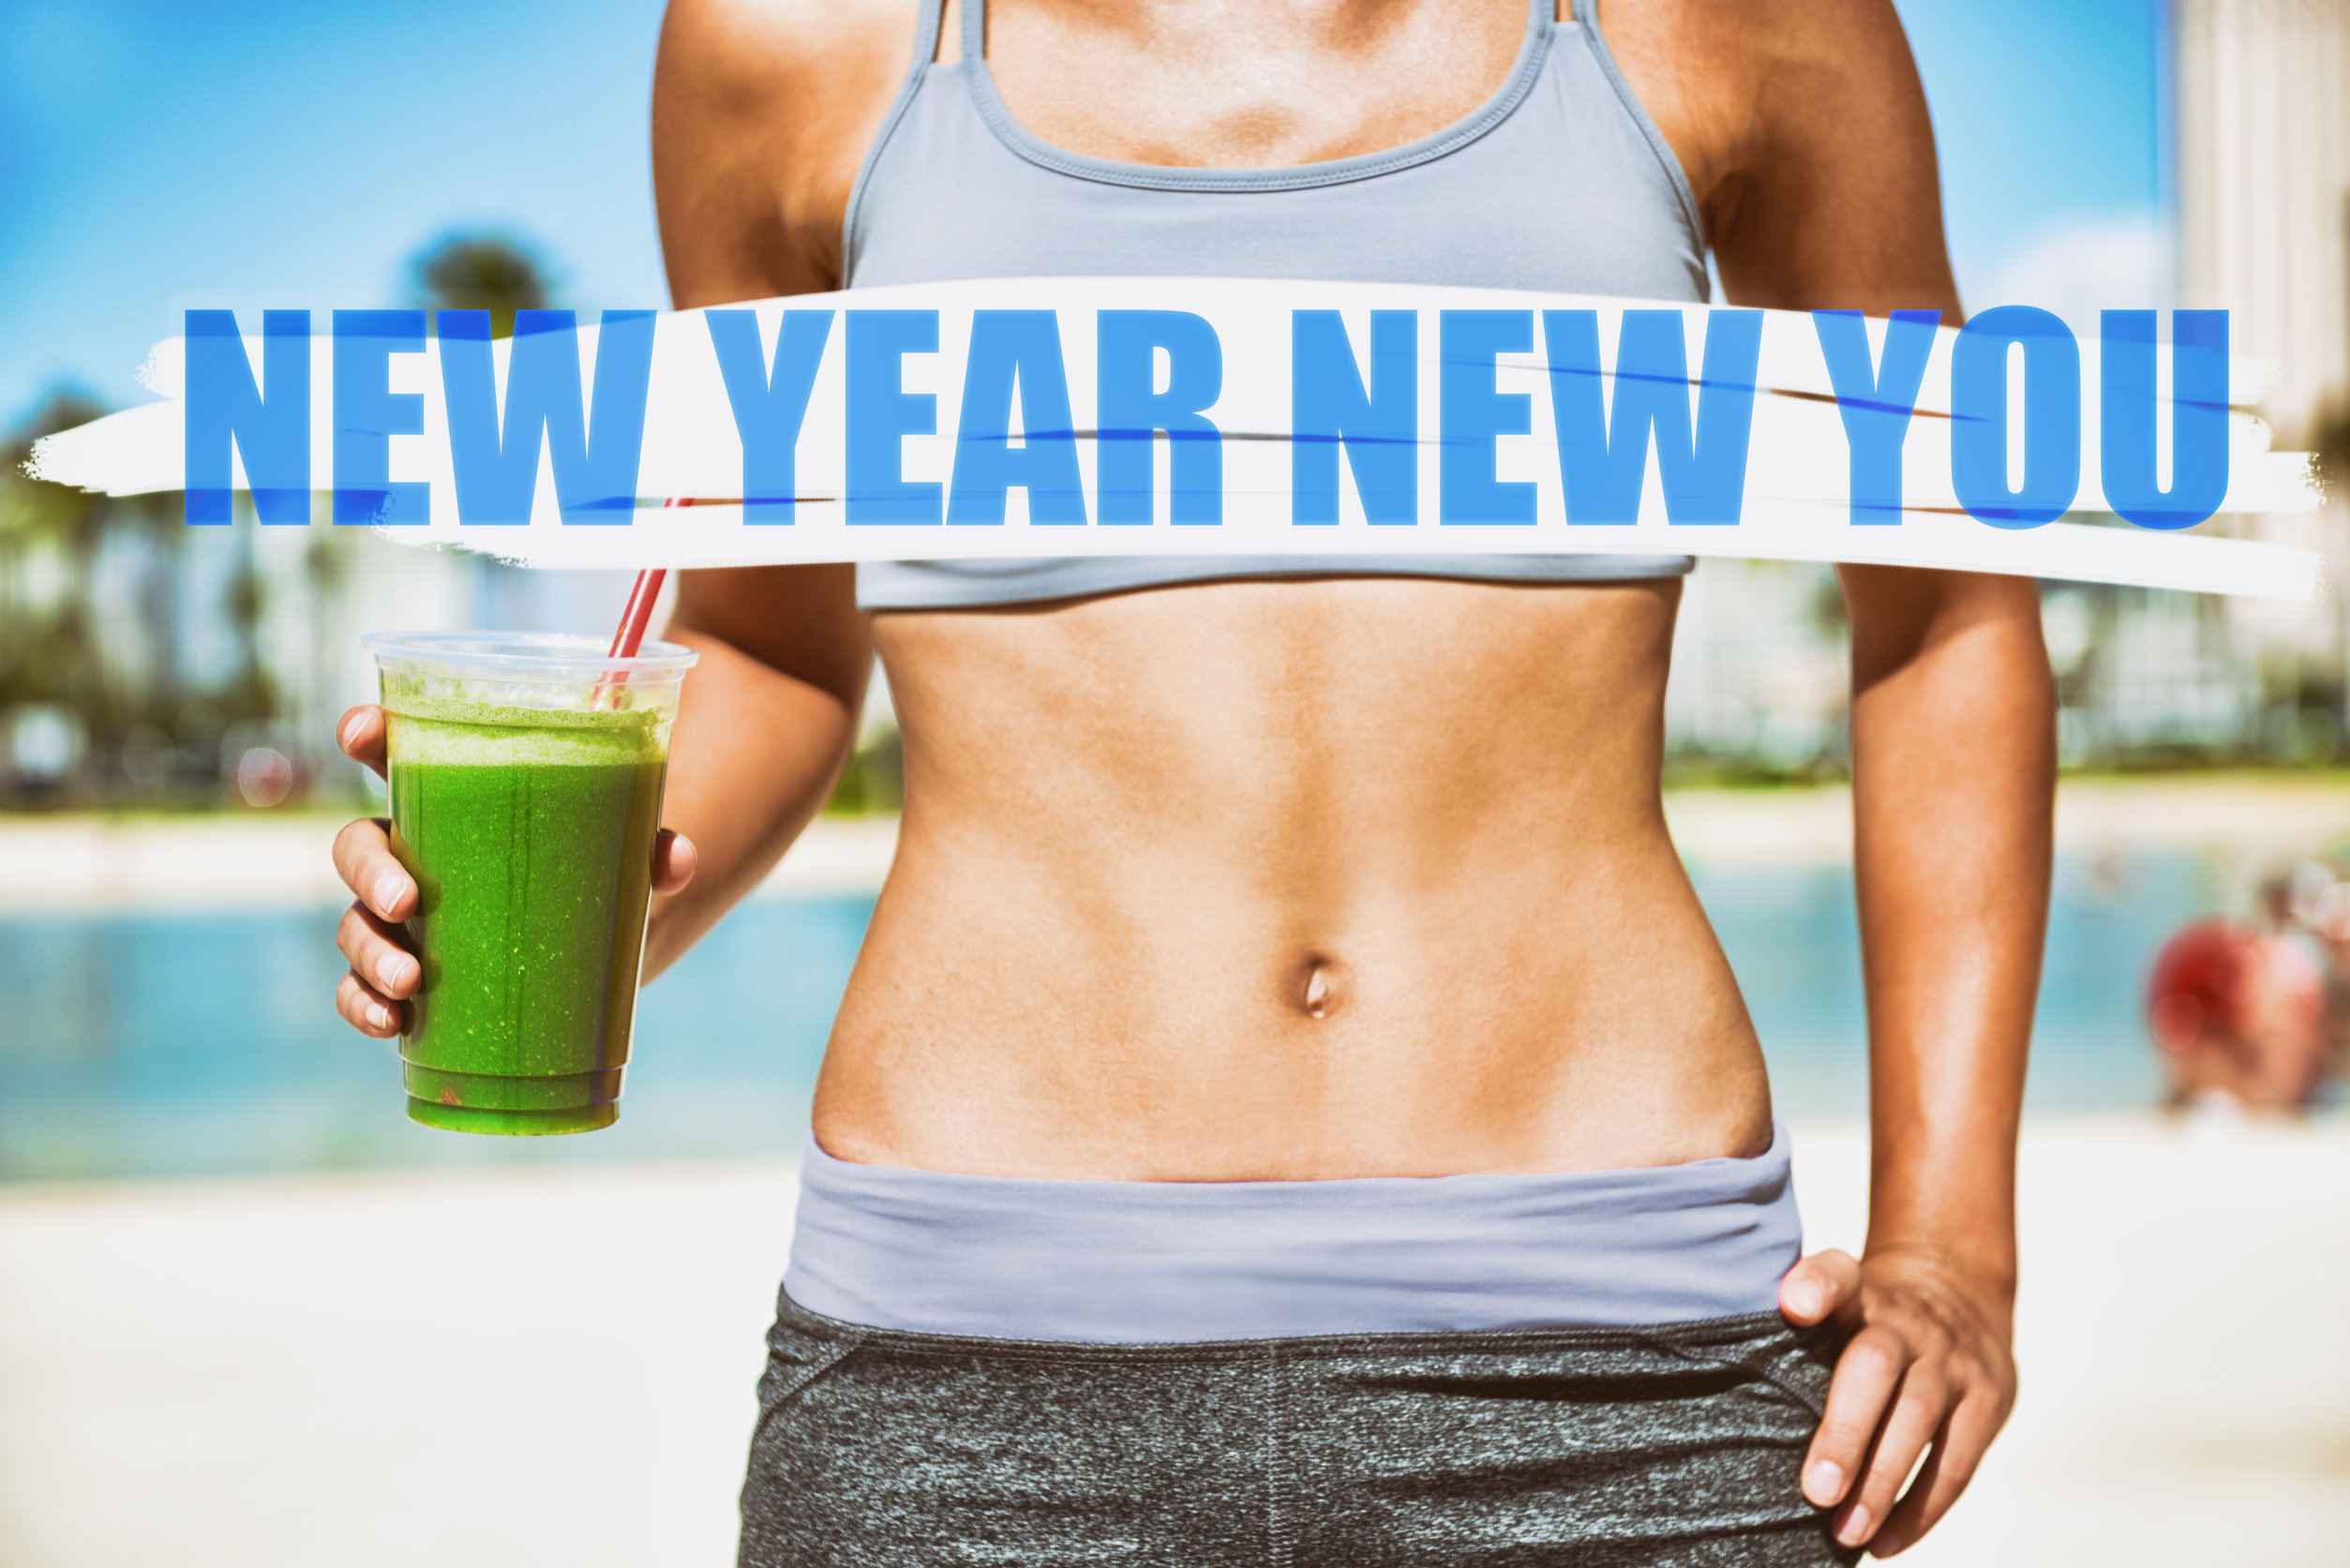 New Year, New You With a Medical Assisted Weight Loss Plan